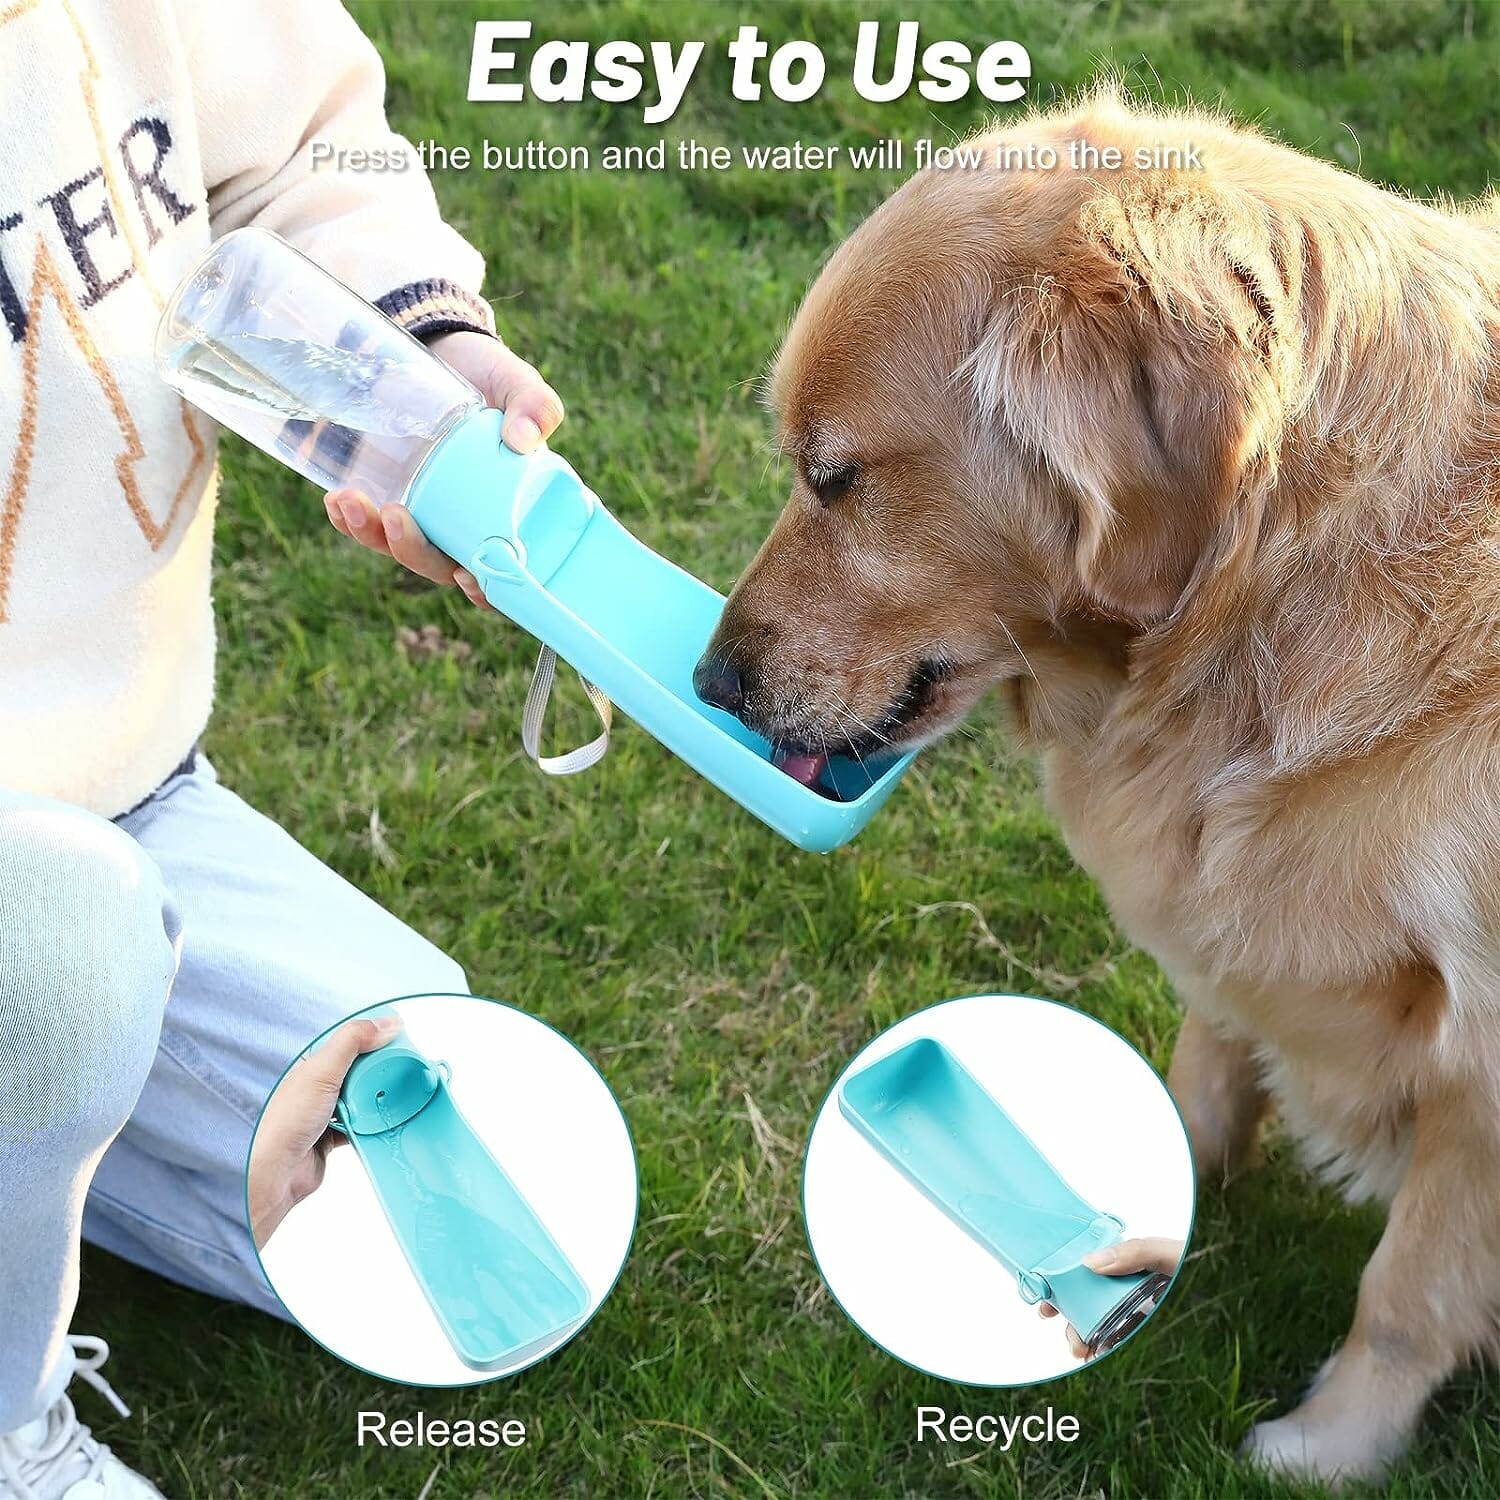 Buidic Foldable Portable Dog Water Bottle Dispenser Review